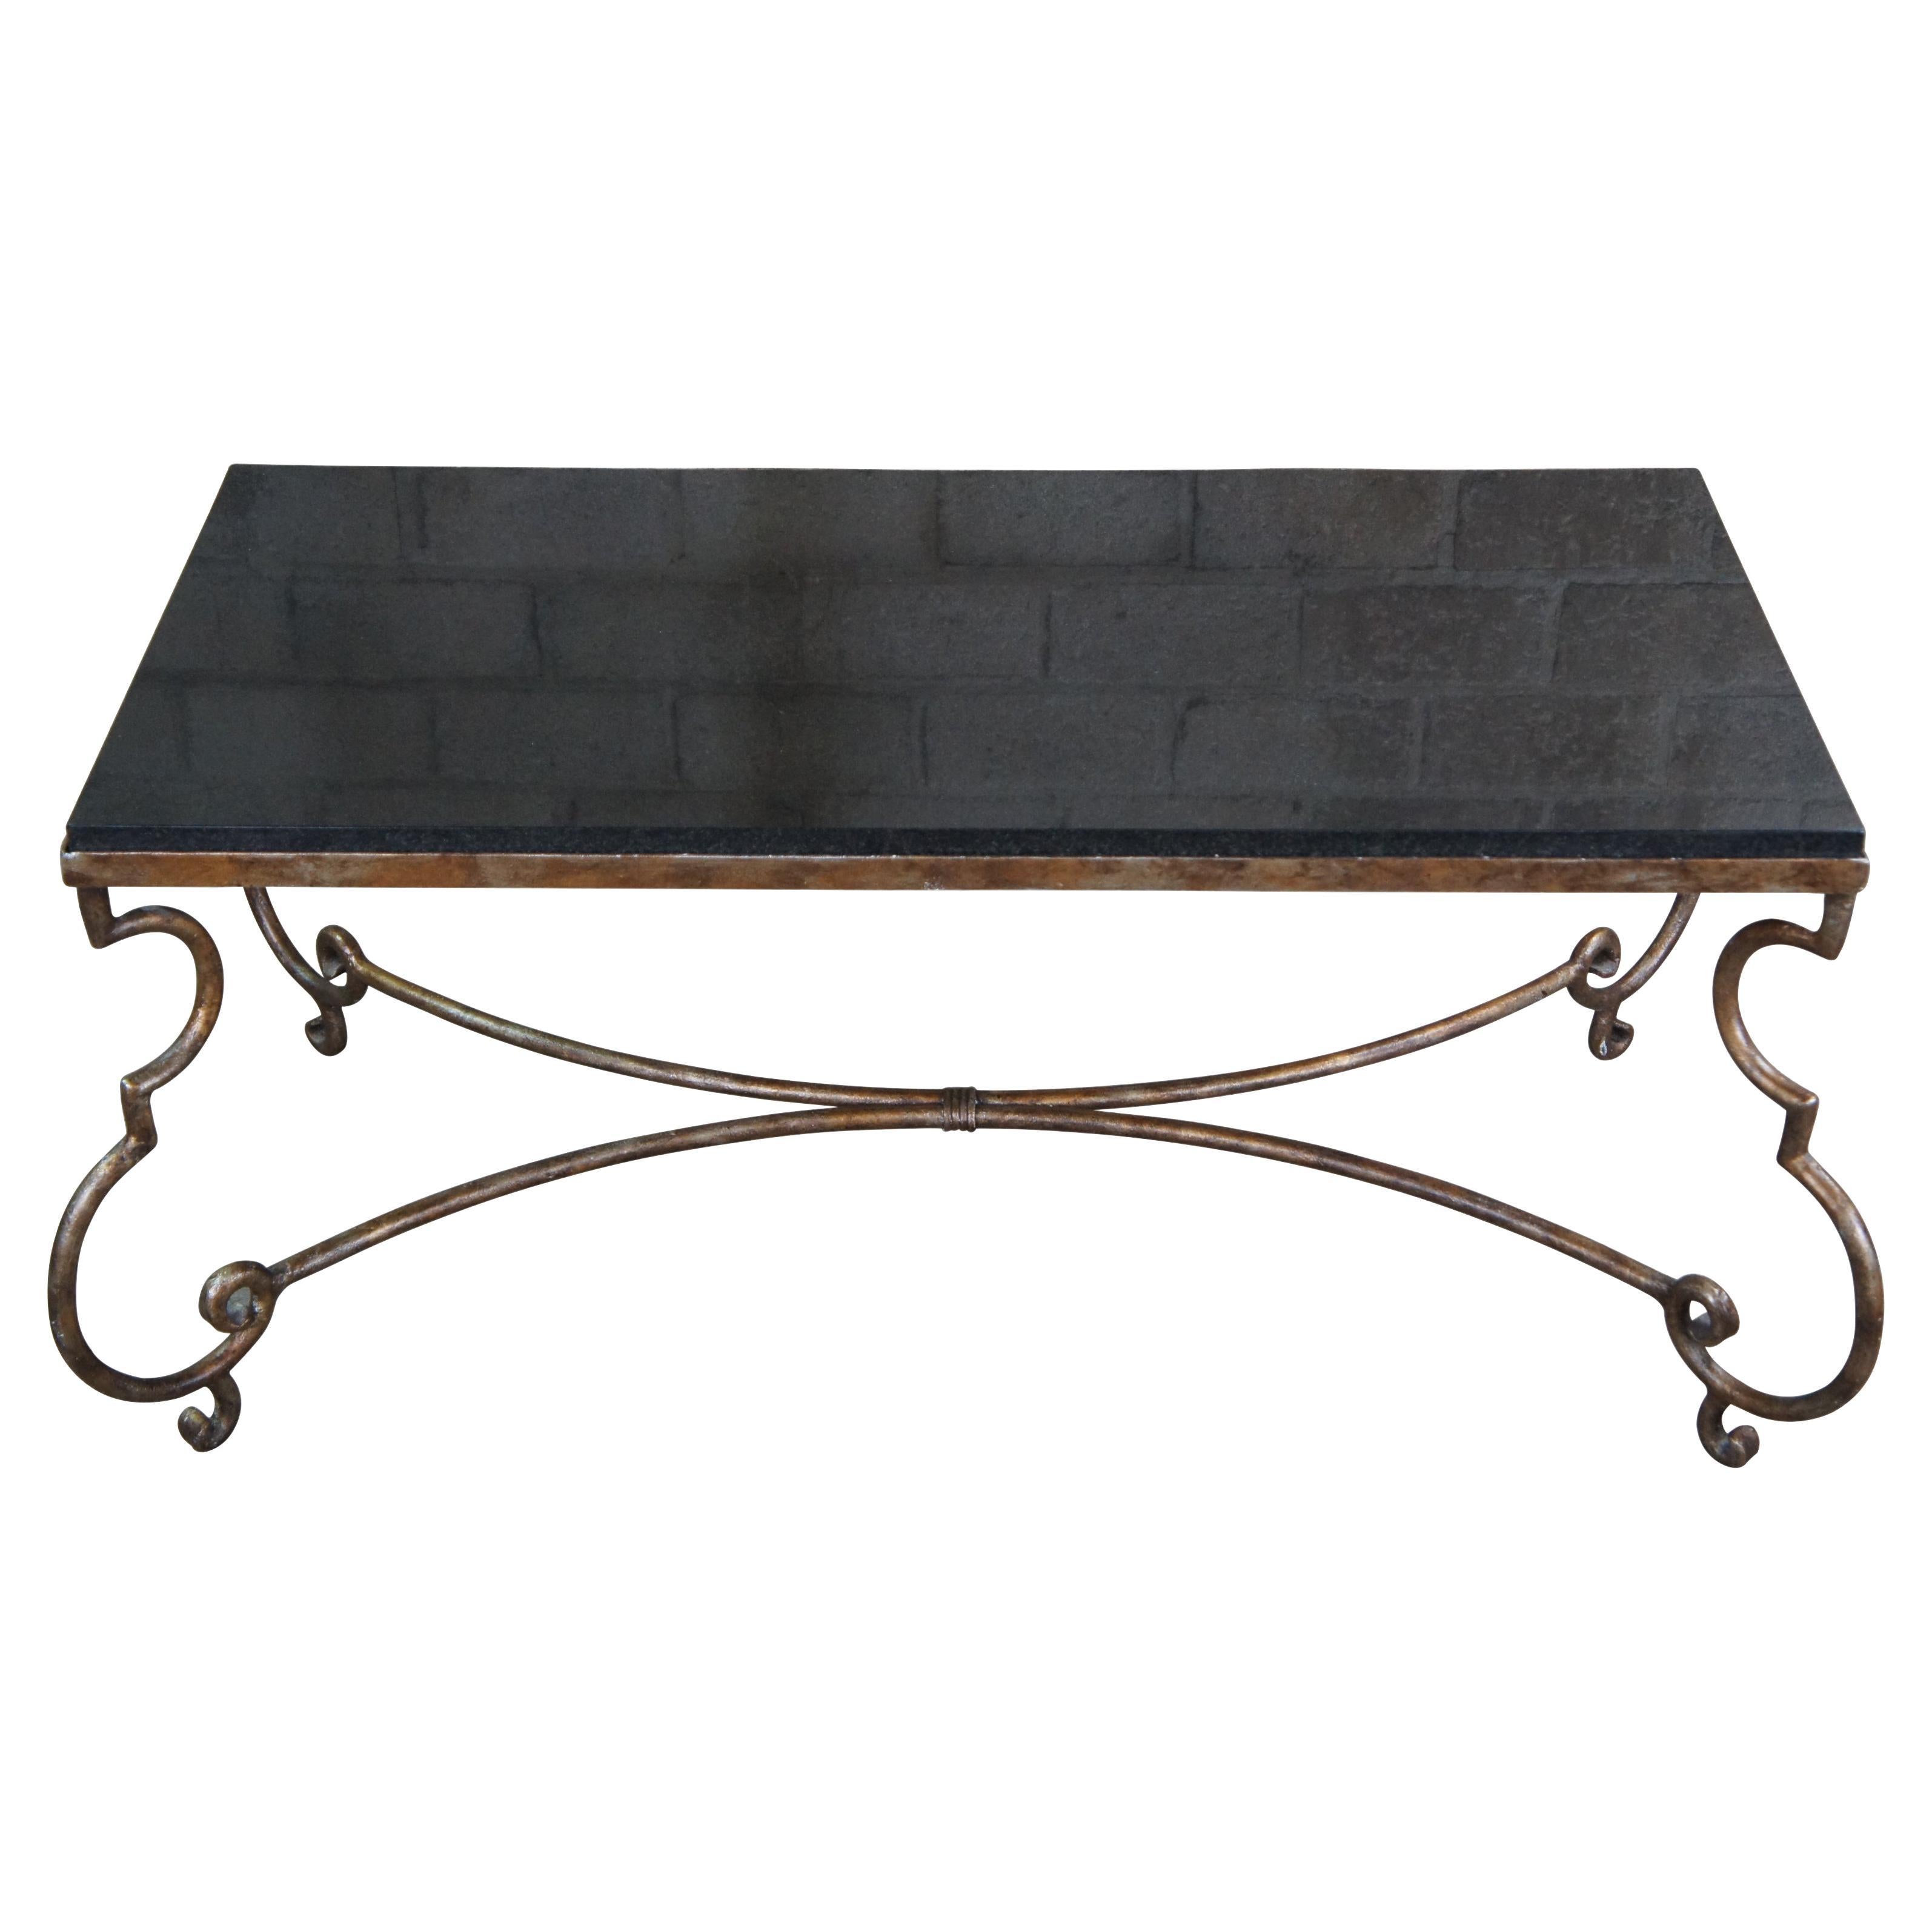 Vintage Neoclassical Granite & Scrolled Iron Rectangular Coffee Cocktail Table